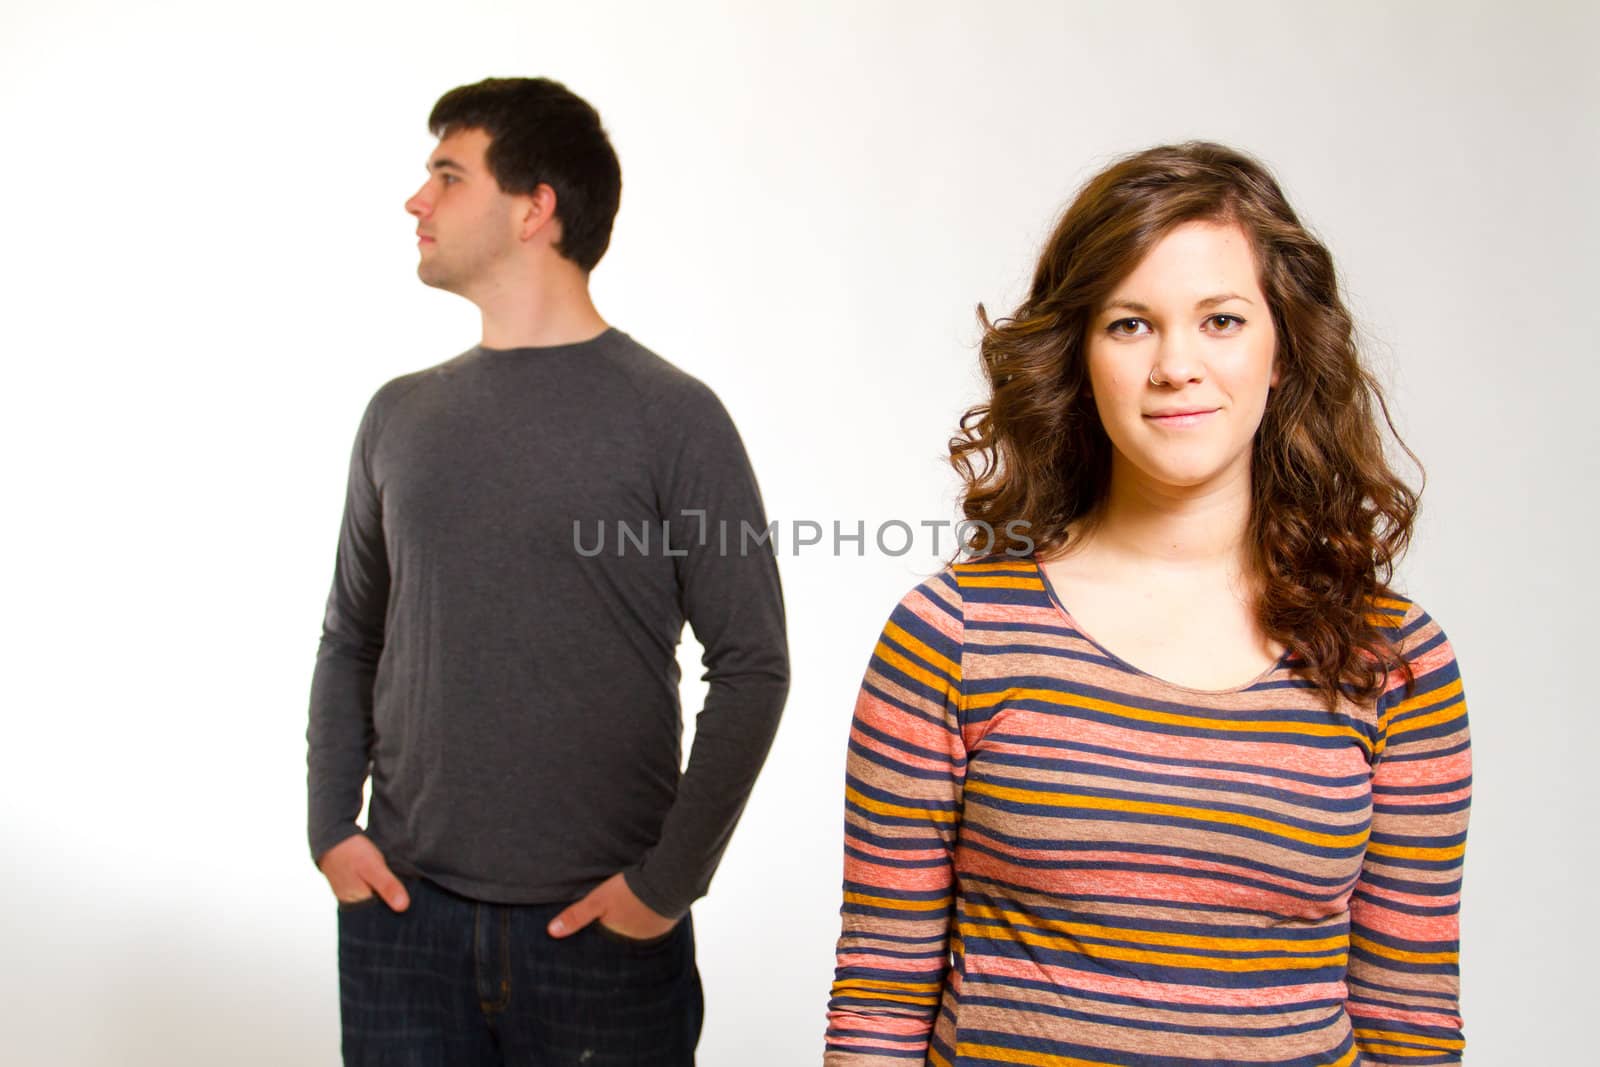 Attractive Couple Isolated in Studio by joshuaraineyphotography